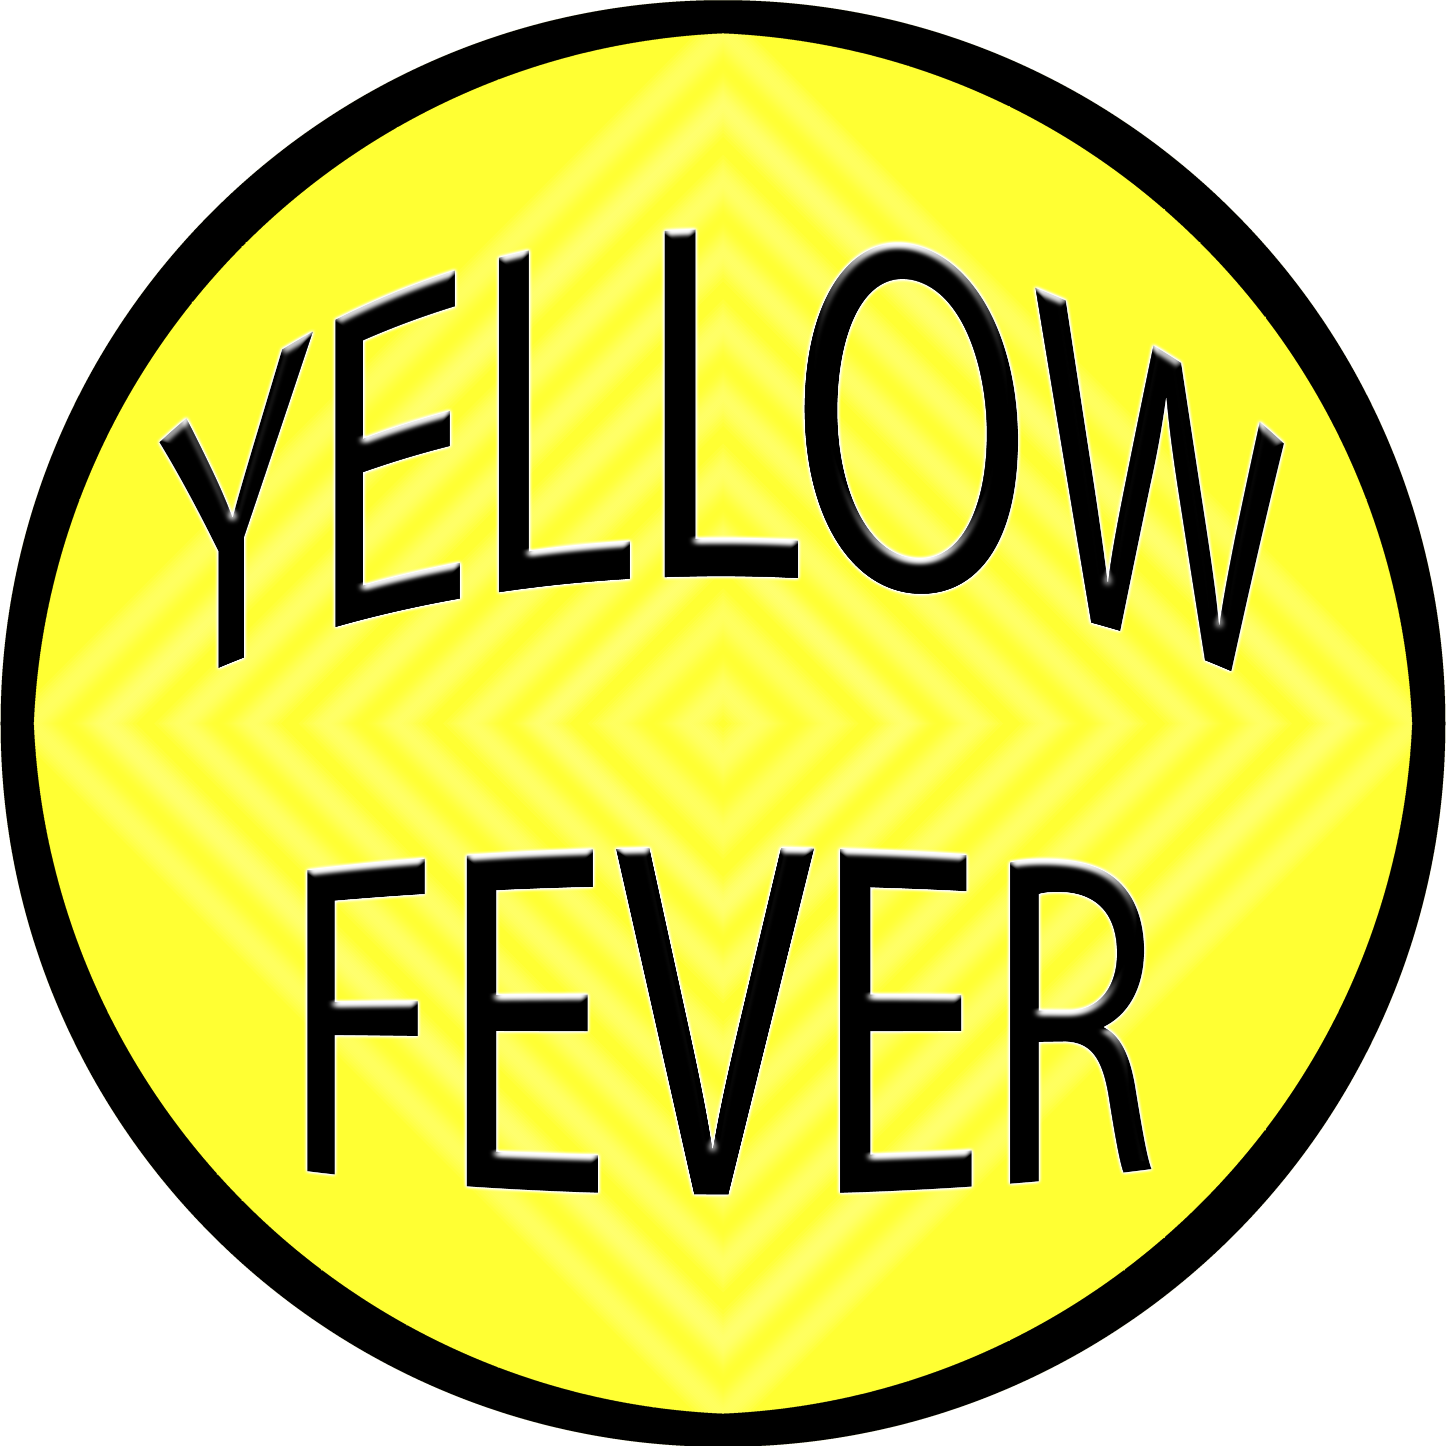 fever clipart sign